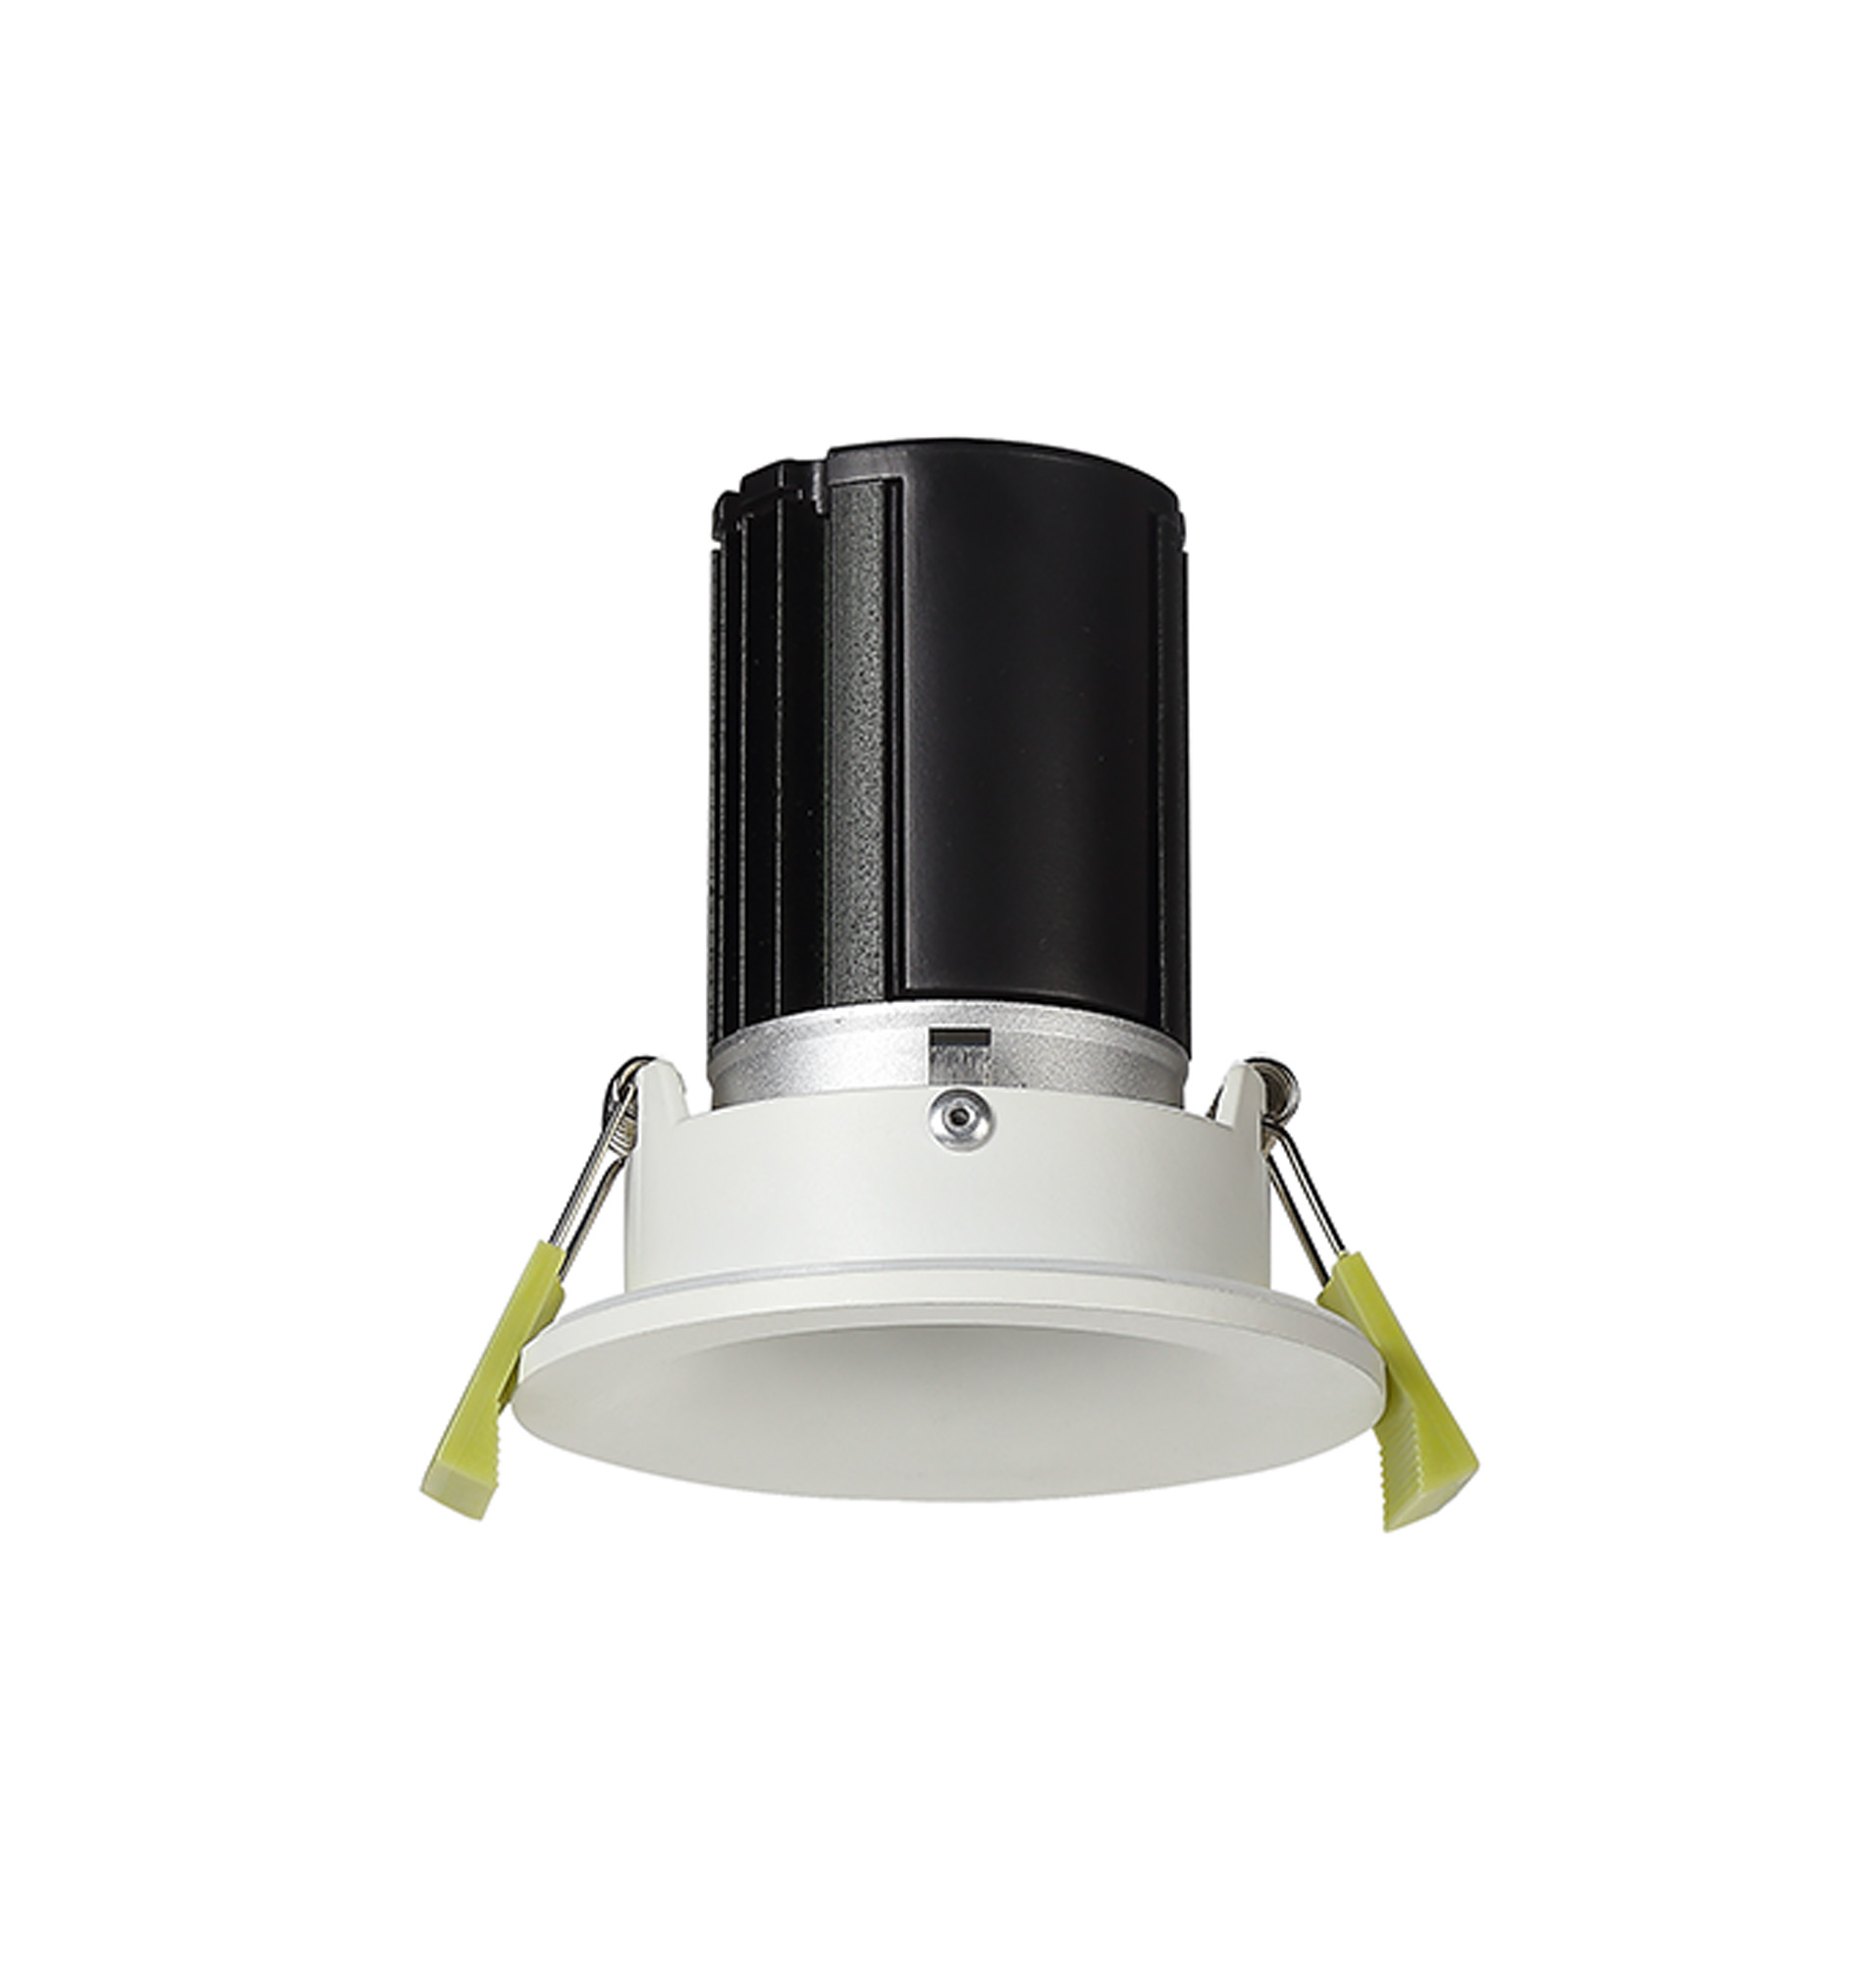 DM202492  Bruve 12 Tridonic powered 12W 3000K 1200lm 36° LED Engine;300mA ; CRI>90 LED Engine Matt White Fixed Round Recessed Downlight; Inner Glass cover; IP65